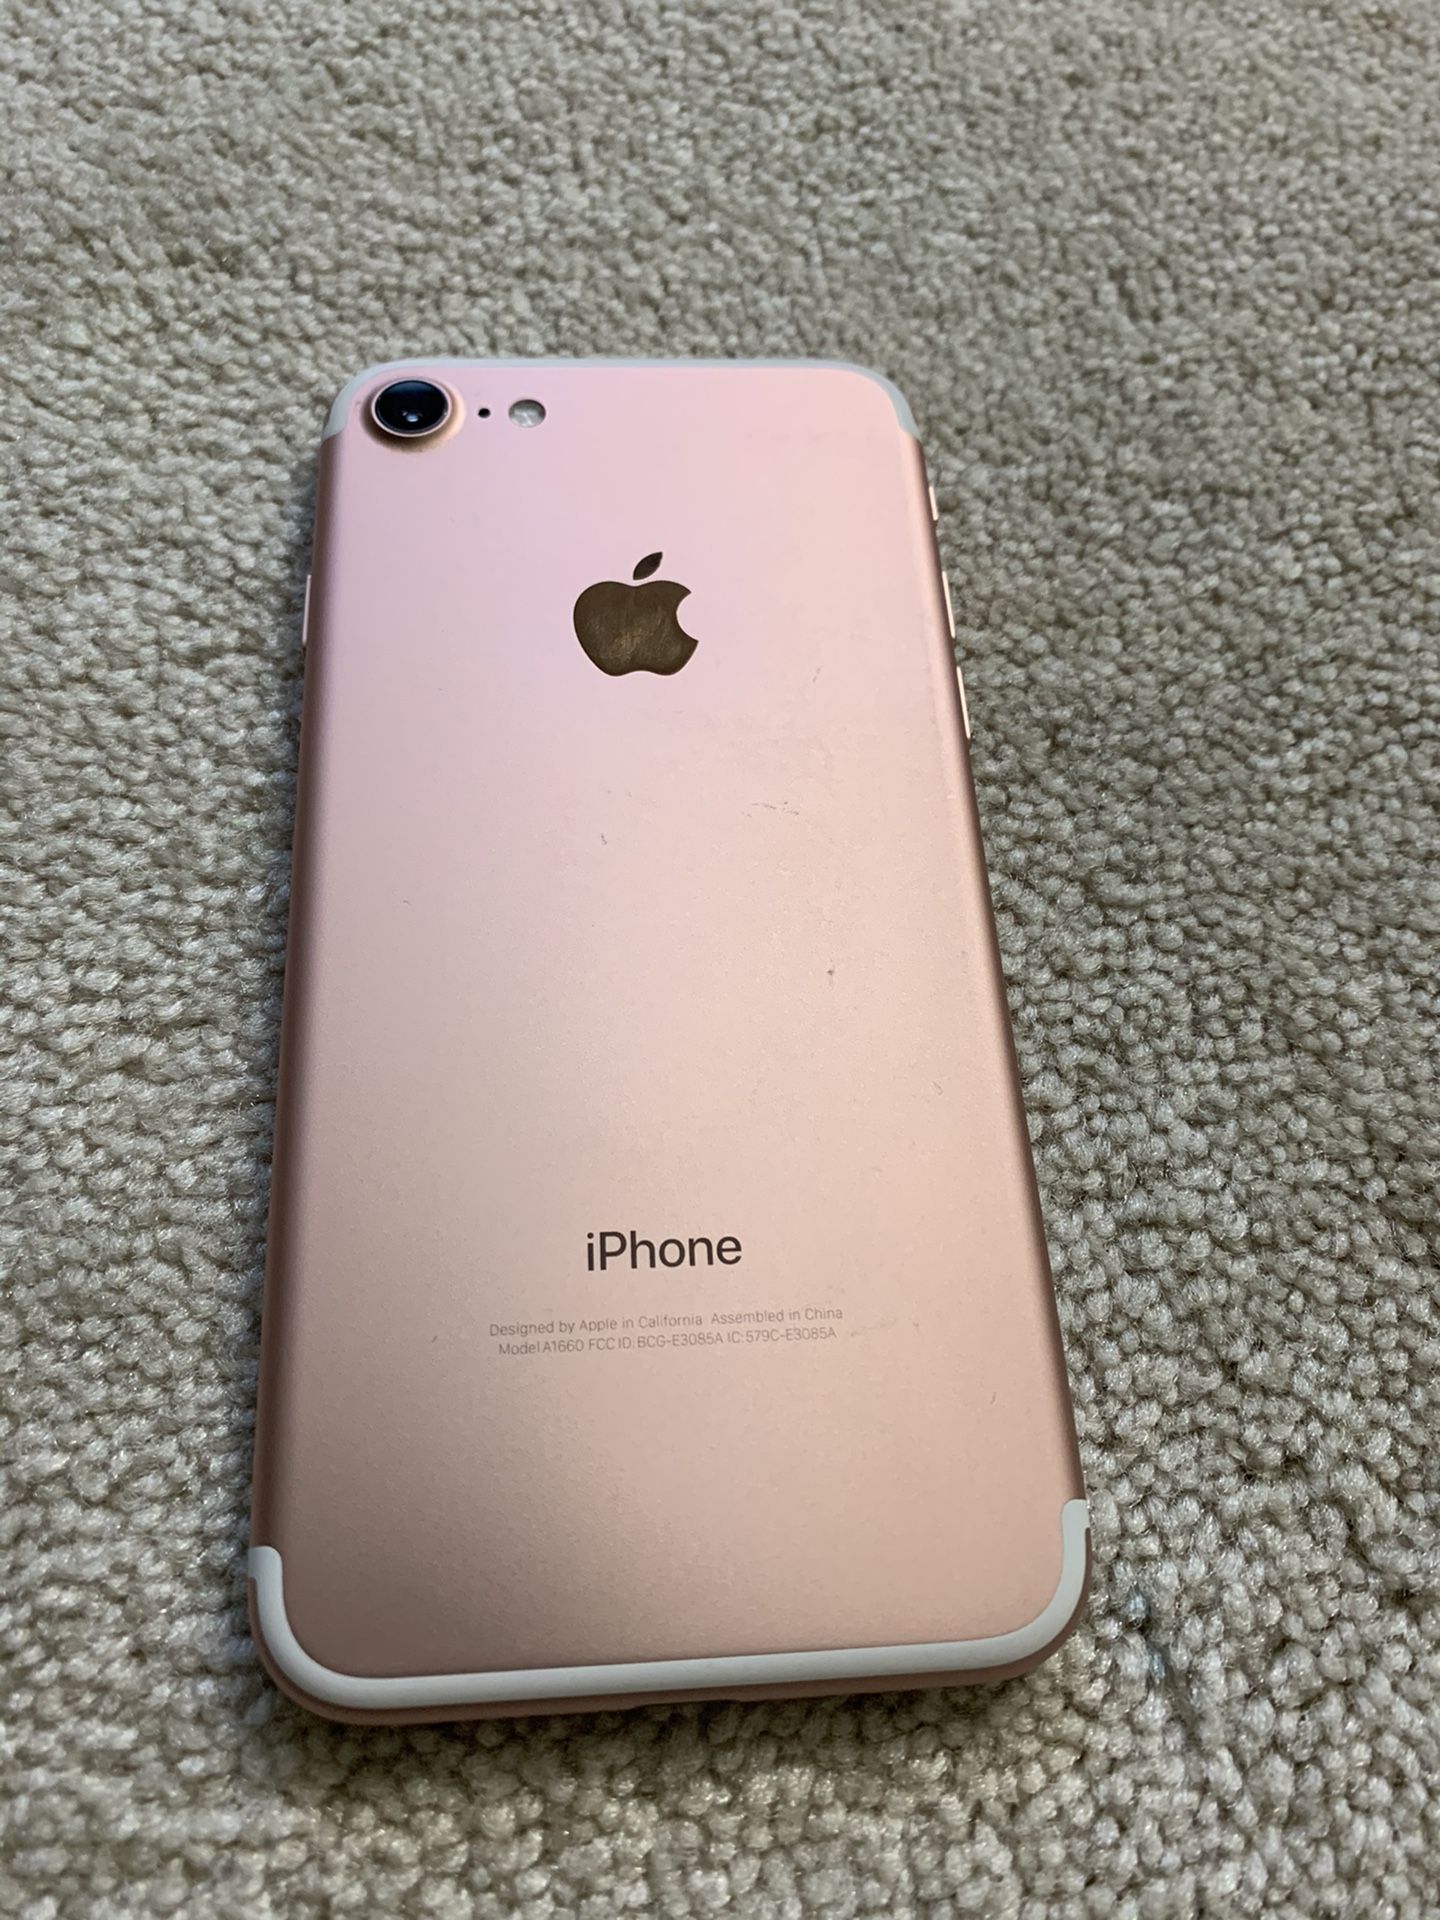 iPhone 7 32gb Carrier T-Mobile. No scratches cracks or anything, good condition, for sale $220